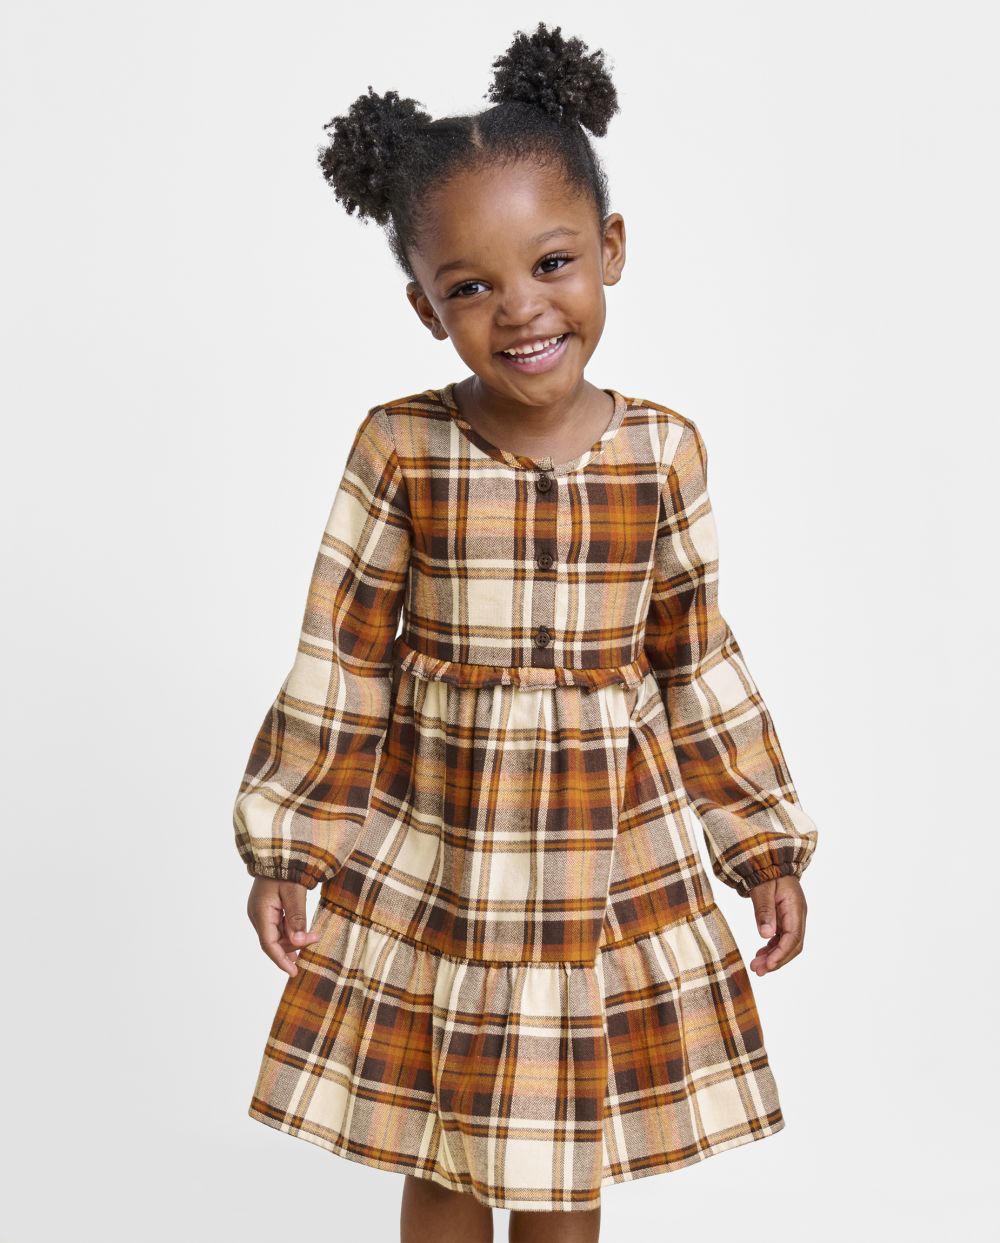 Toddler Ruffle Trim Above the Knee Cotton Long Sleeves Crew Neck Tiered Plaid Print Shirt Dress